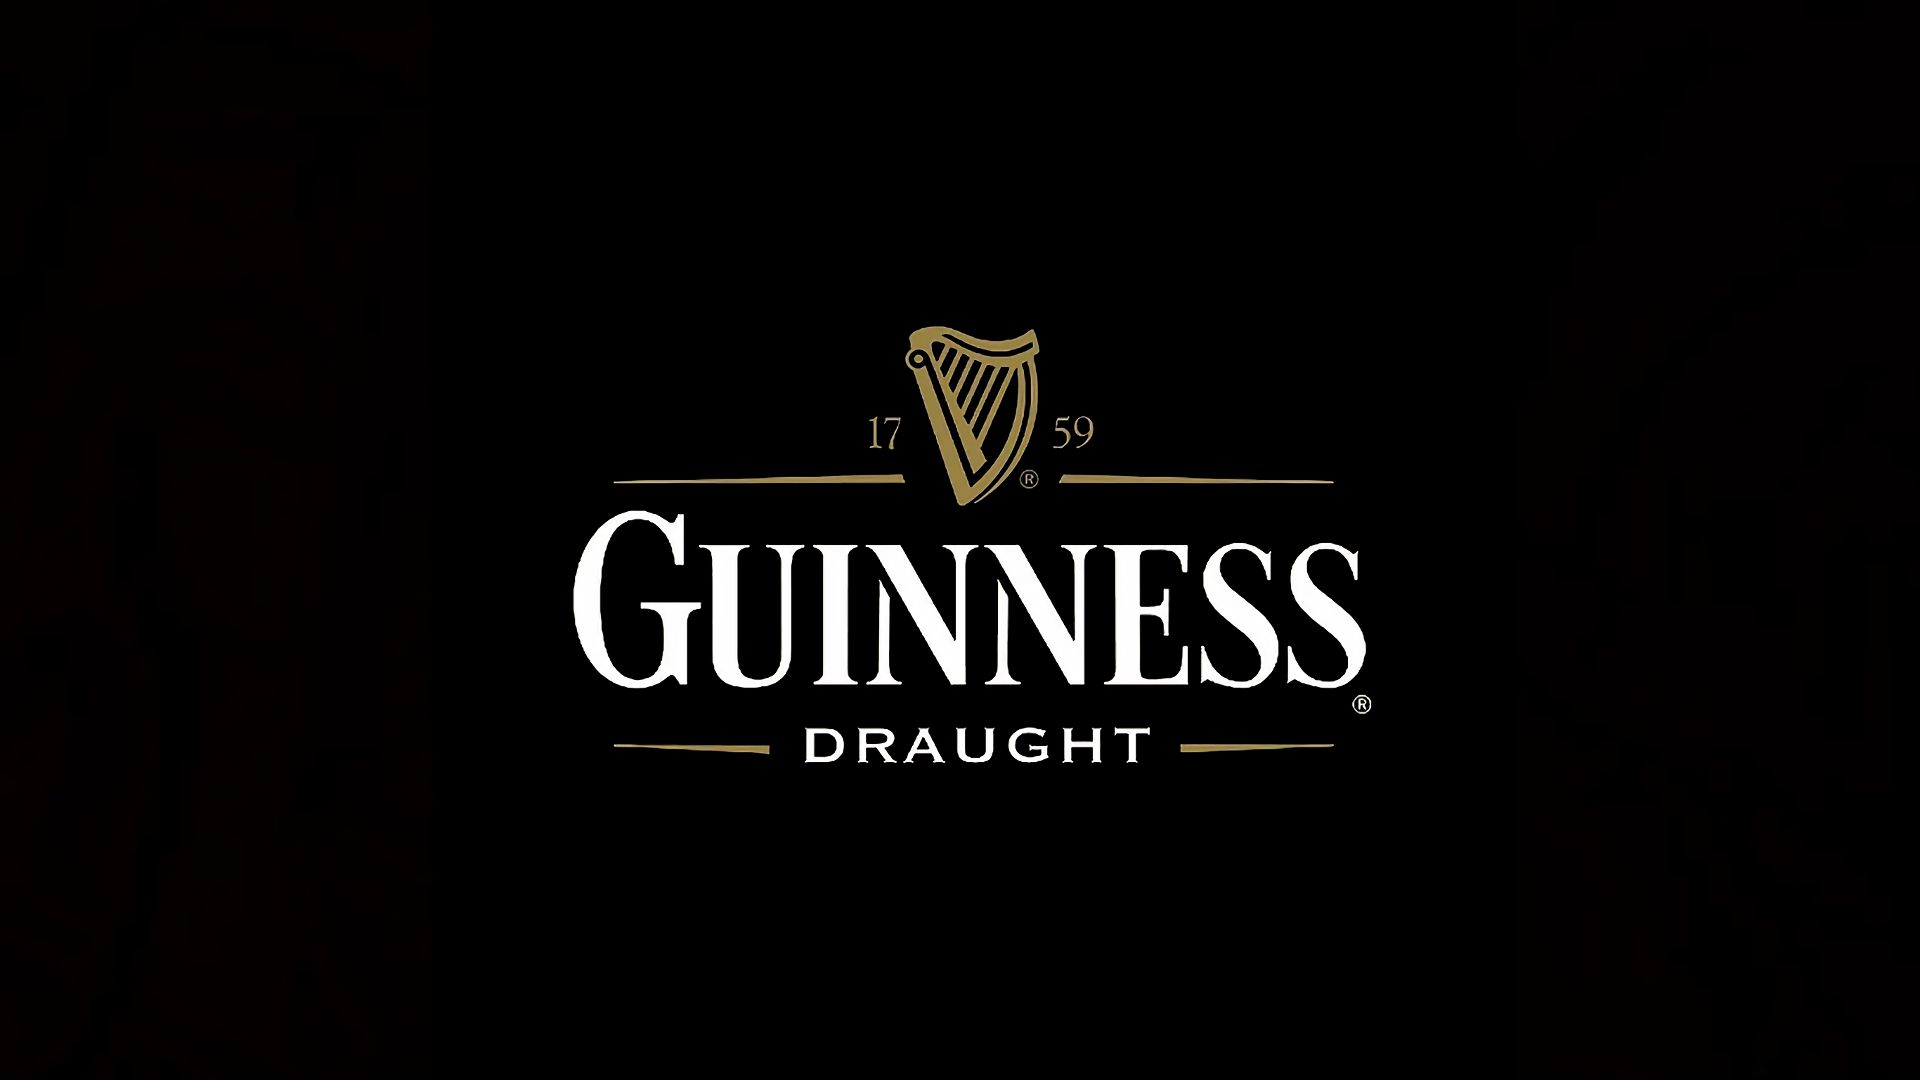 products, guinness, food Aesthetic wallpaper